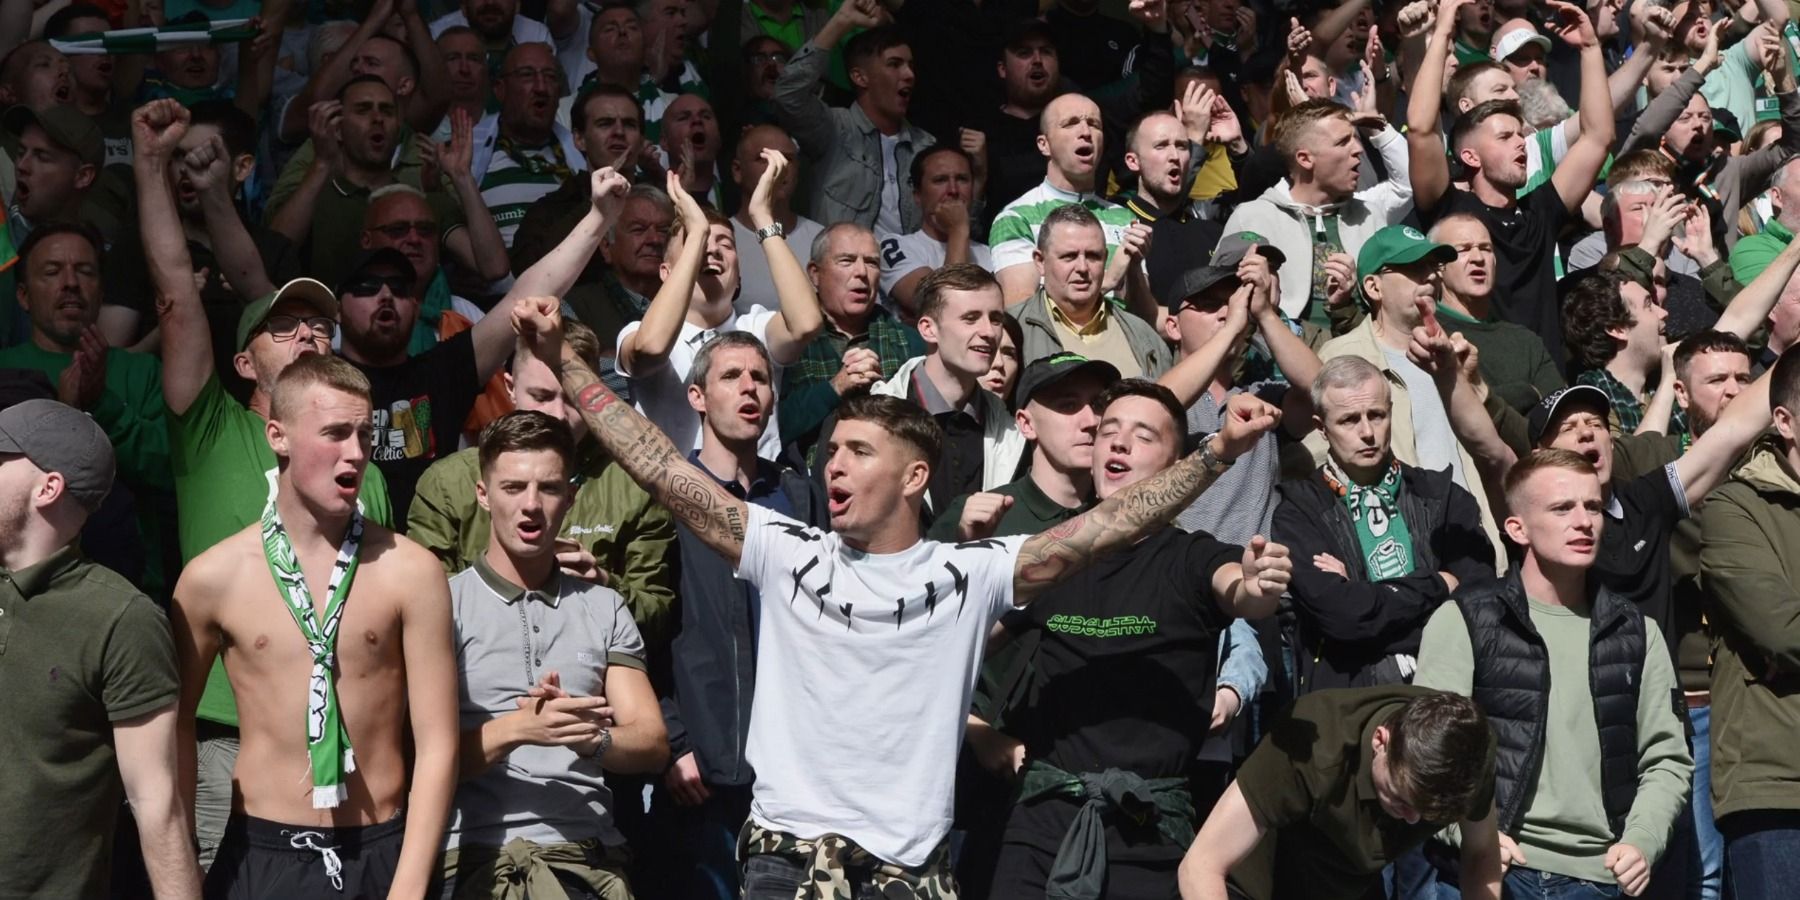 Celtic F.C. fans crowd in Welcome to Wrexham